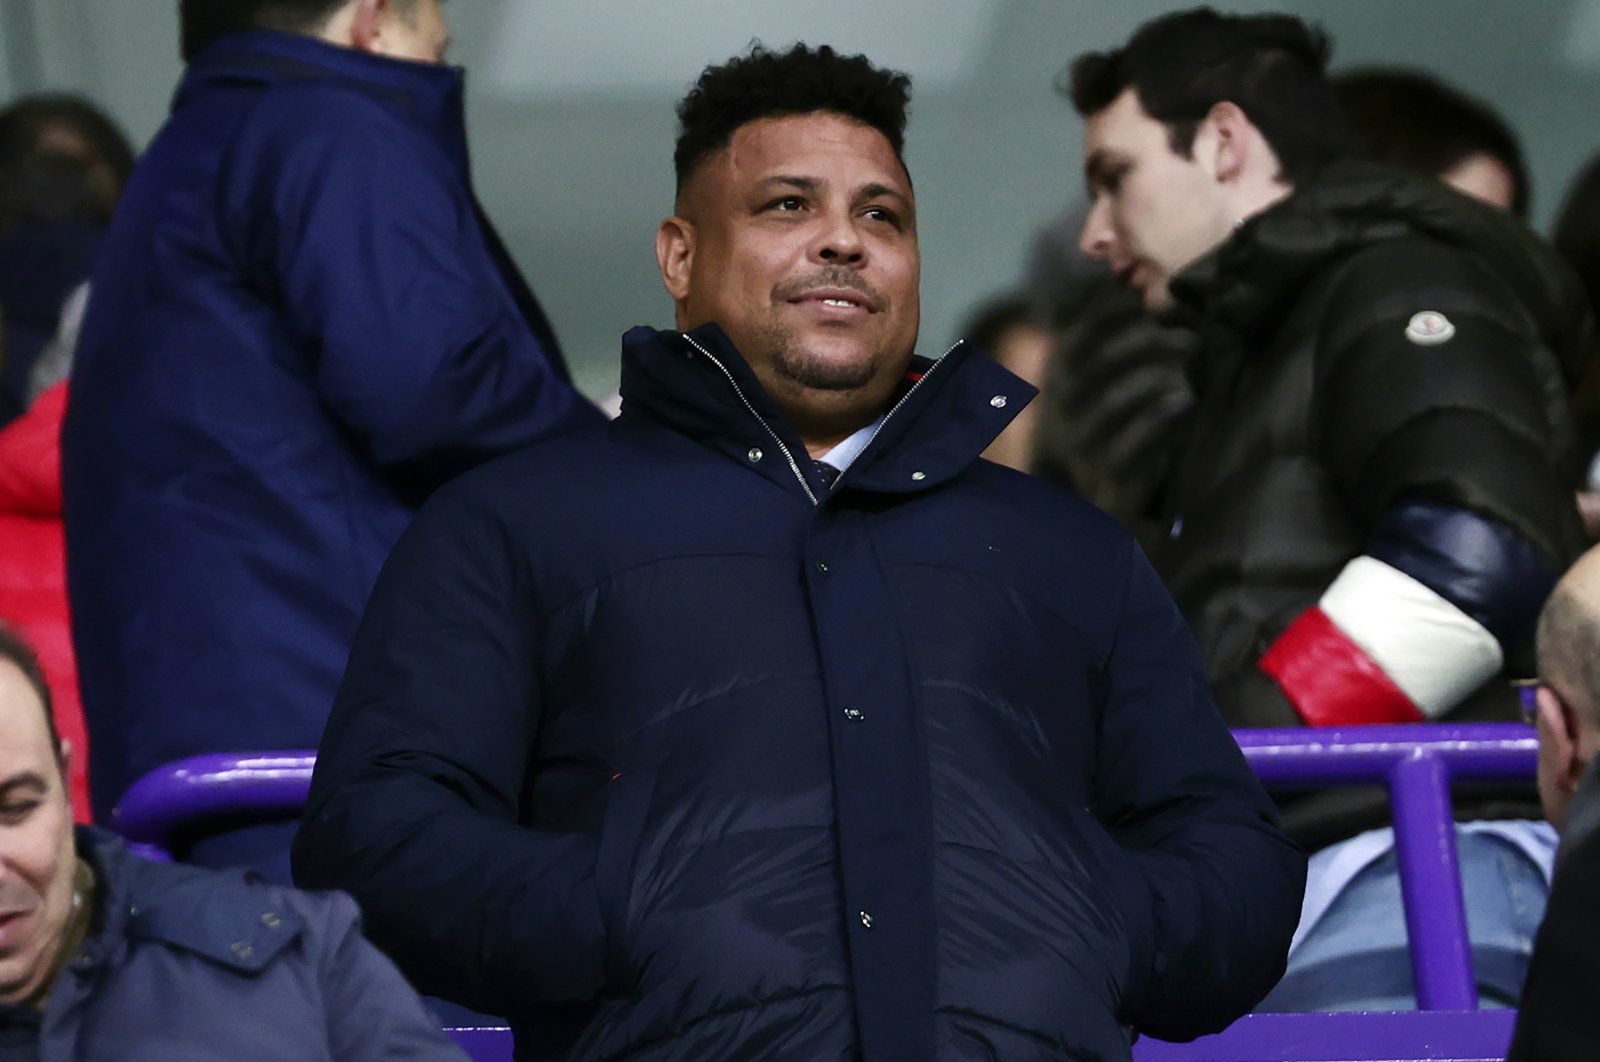 Ronaldo Nazario looks out onto the pitch before a La Liga match between Valladolid and Real Madrid, Valladolid, Spain, Dec. 30, 2022. (AP Photo)